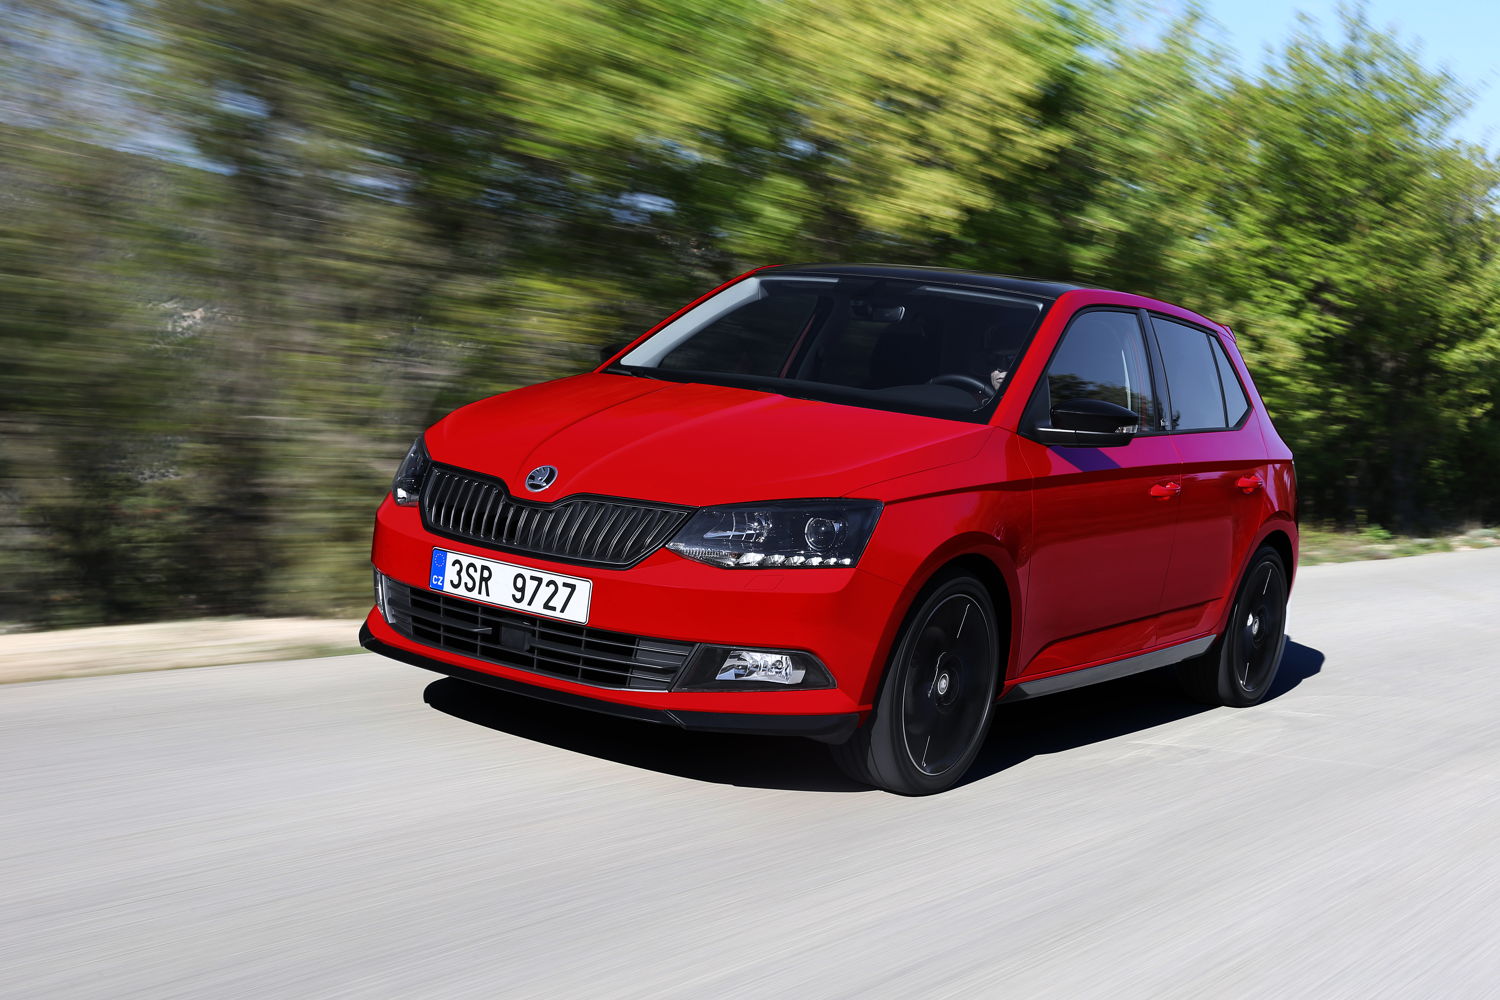 Less cylinder capacity, more power. In the ŠKODA FABIA and ŠKODA FABIA COMBI, a 1.0 TSI engine with three cylinders and four valves is replacing the 1.2-litre engine with four cylinders that has been used to date.